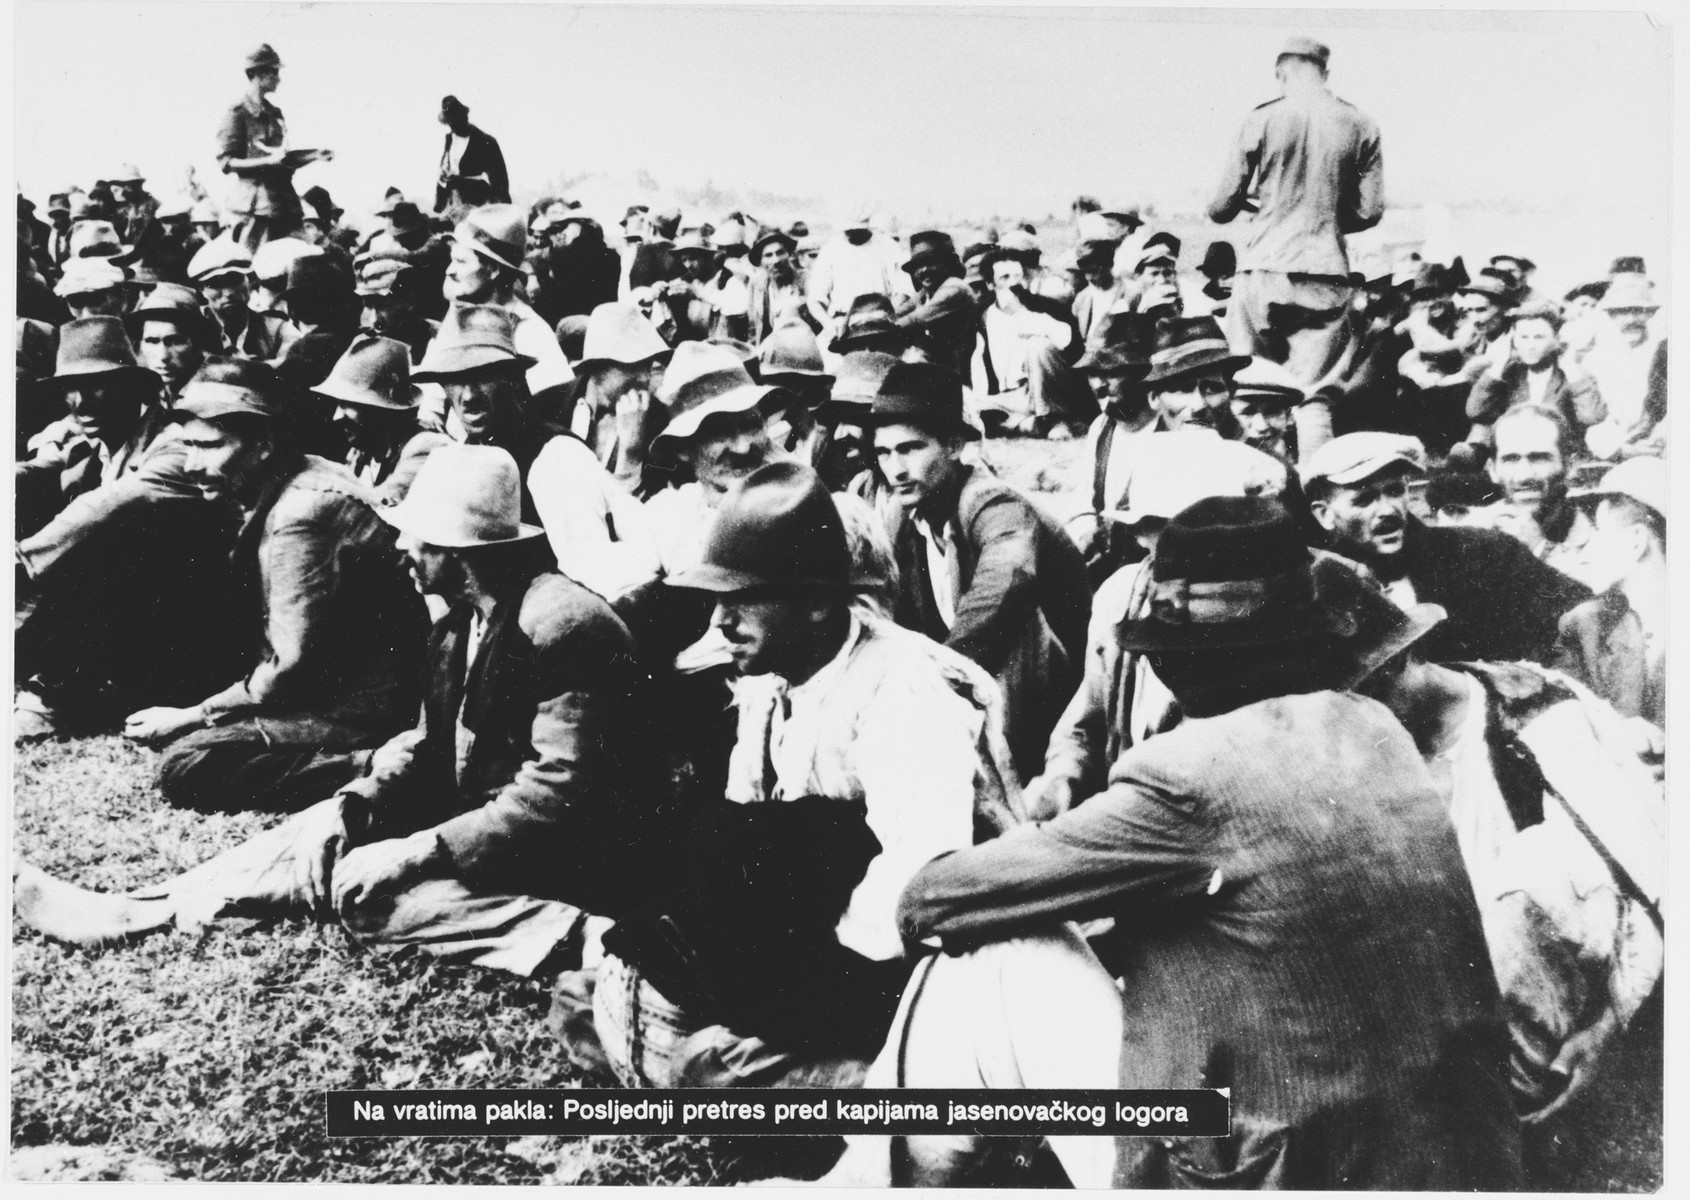 Ustasa guards move among a large group of Serbian villagers who are seated on the ground near the entrance to the Jasenovac concentration camp.

Original caption reads, "At Hell's door: last search at gates of camp Jasenovac"